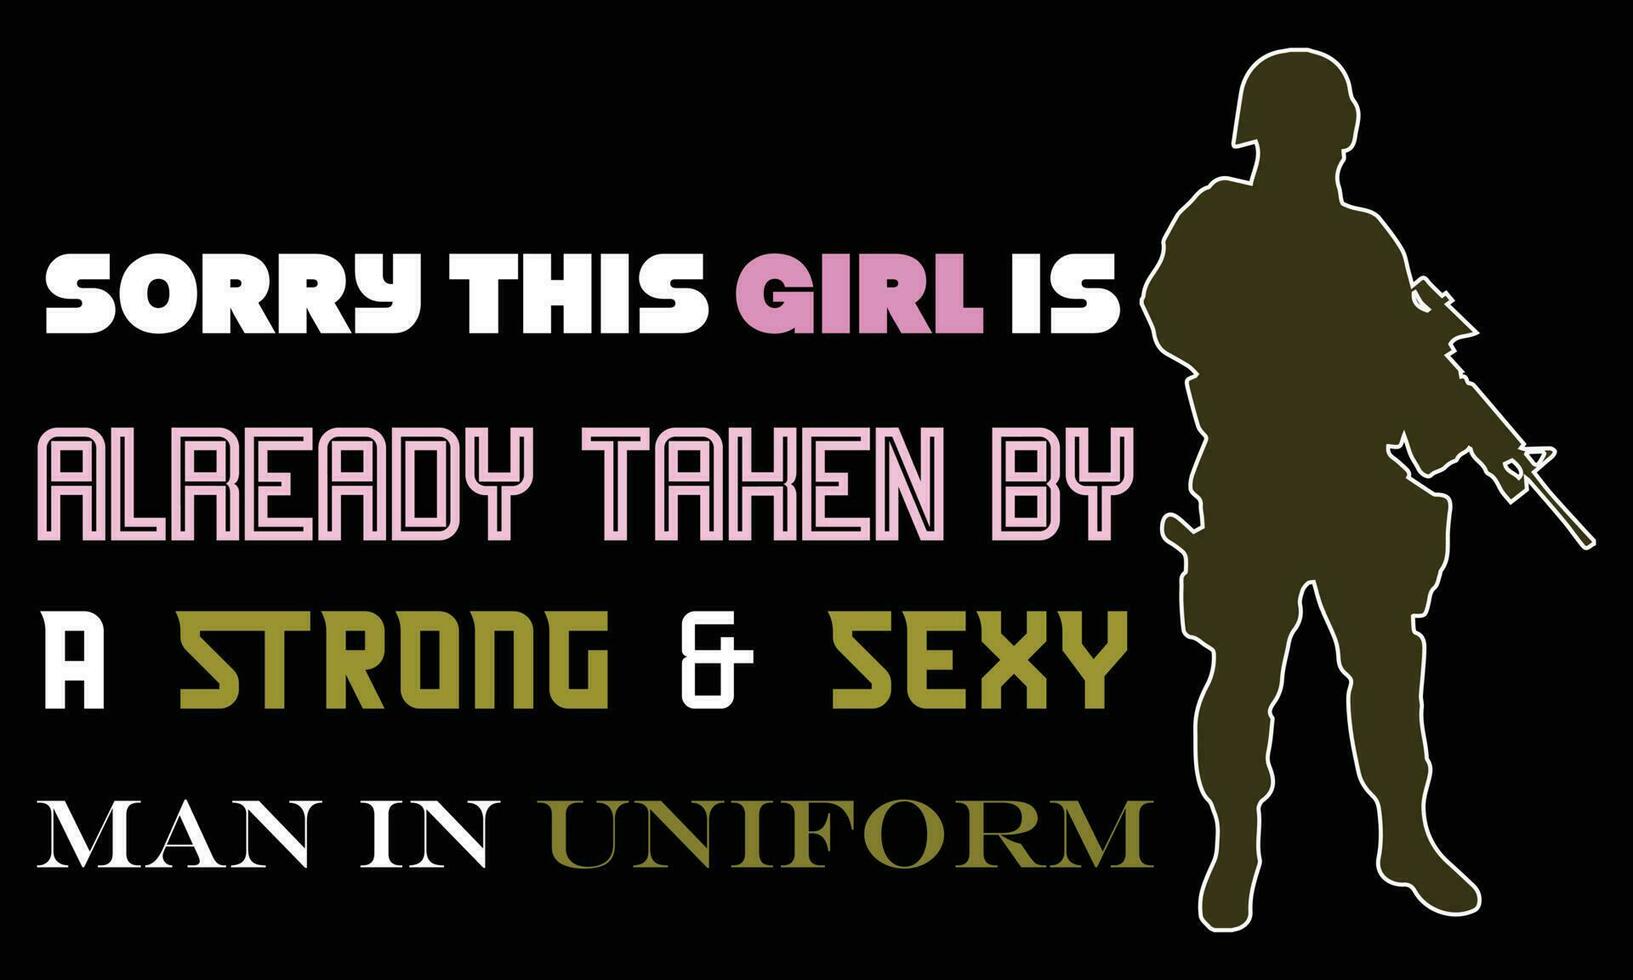 SORRY THIS GIRL IS ALREADY TAKEN BY A STRONG SEXY MAN IN UNIFORM vector